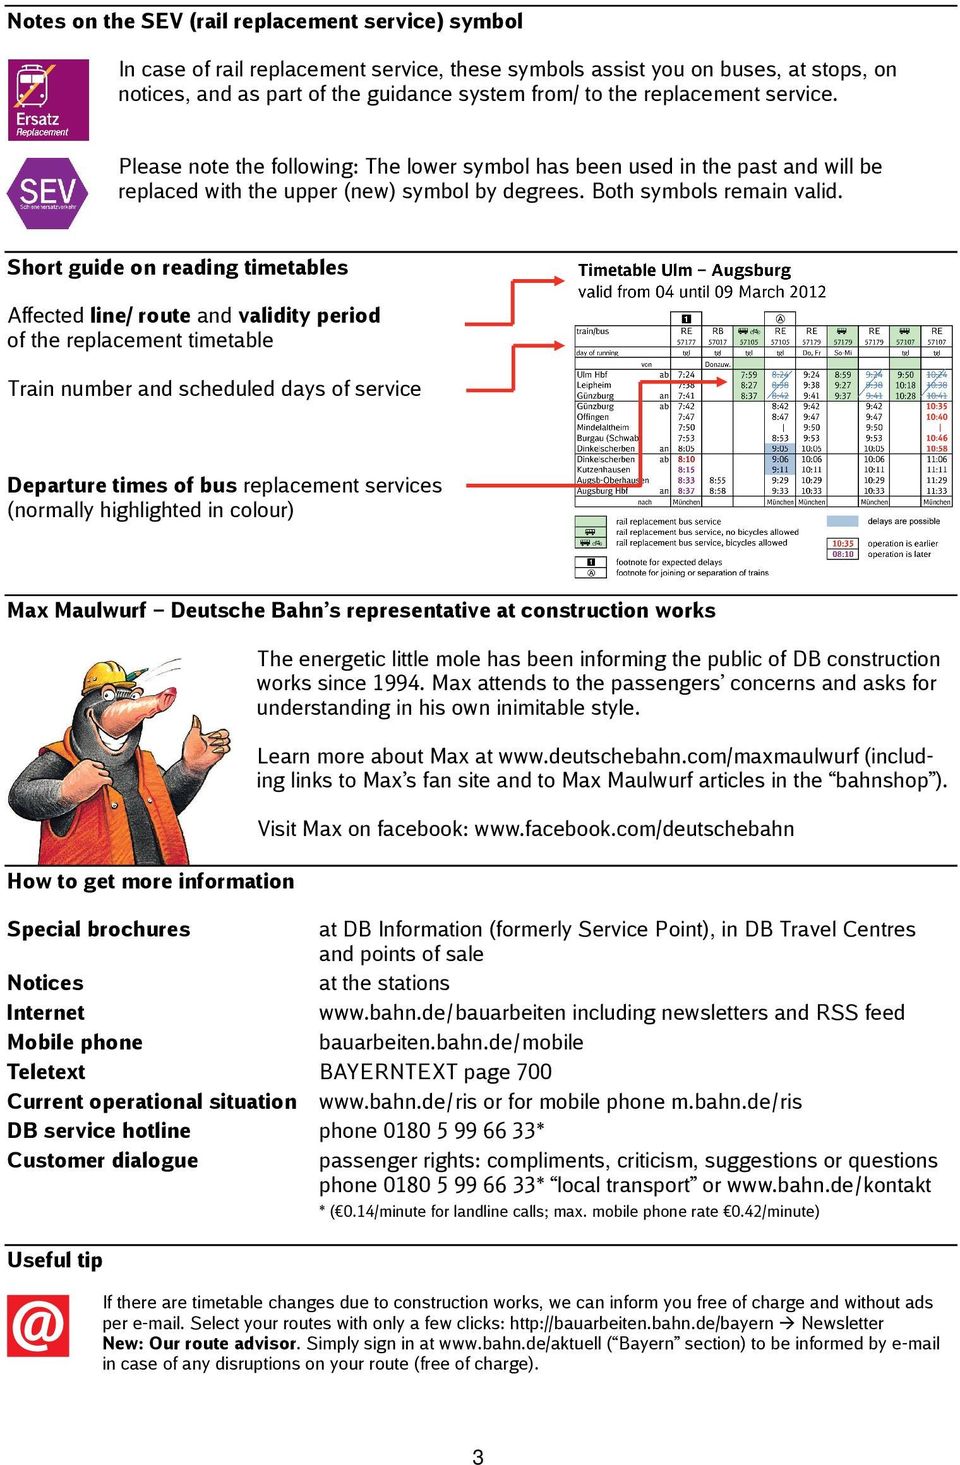 Short guide on reading timetables Affected line/ route and validity period of the replacement timetable Train number and scheduled days of service Departure times of bus replacement services